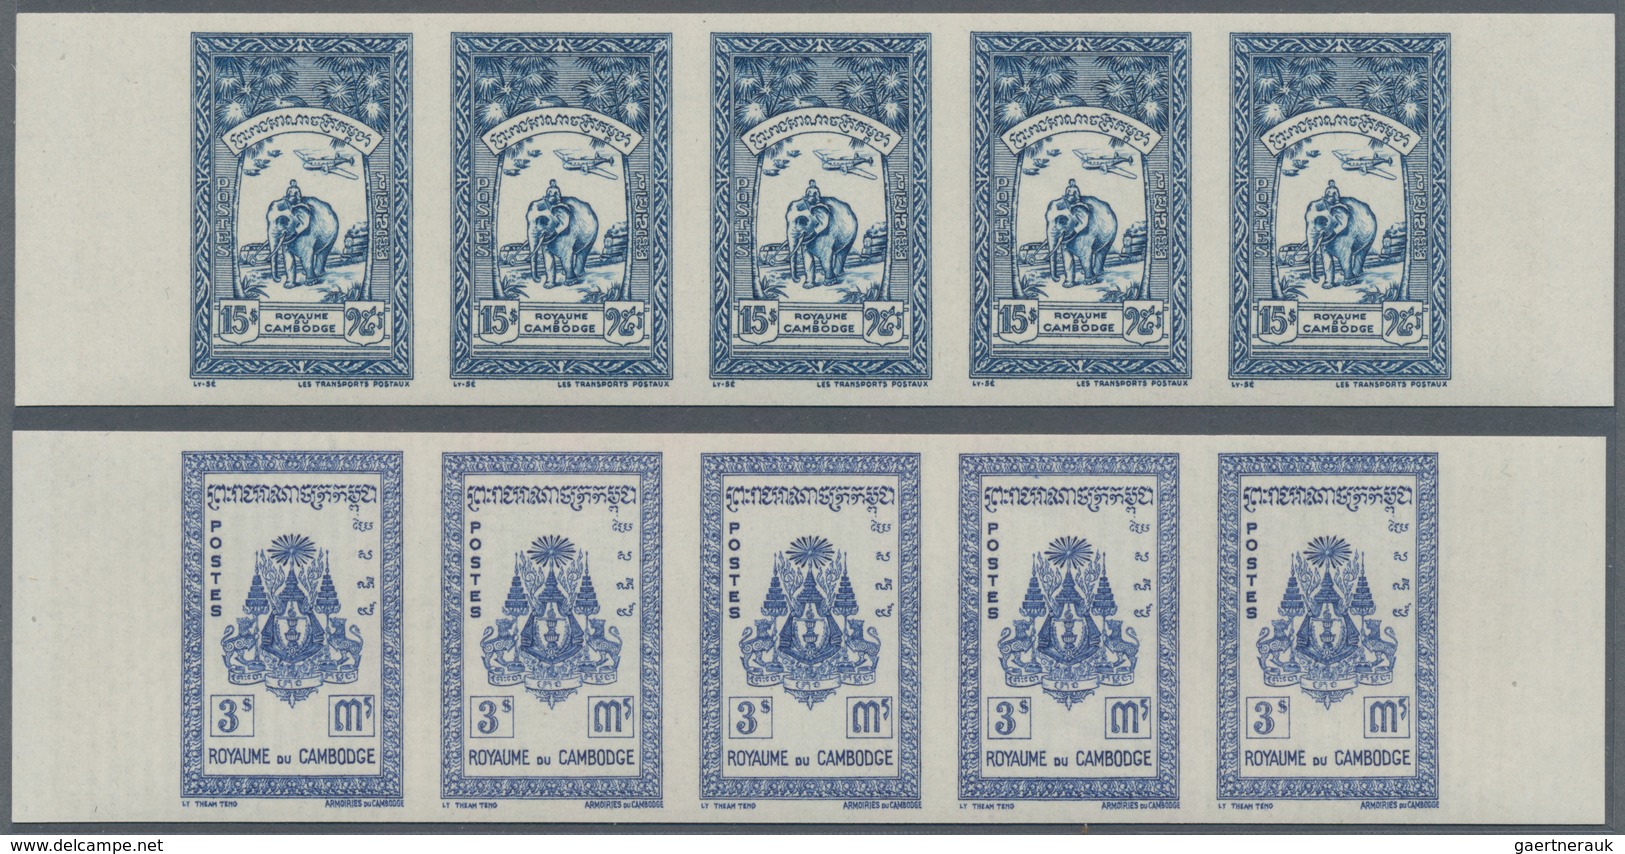 Kambodscha: 1954, definitive issue complete set of 20 (Phnom Daun Penh, Angkor Thom, coat of arms an